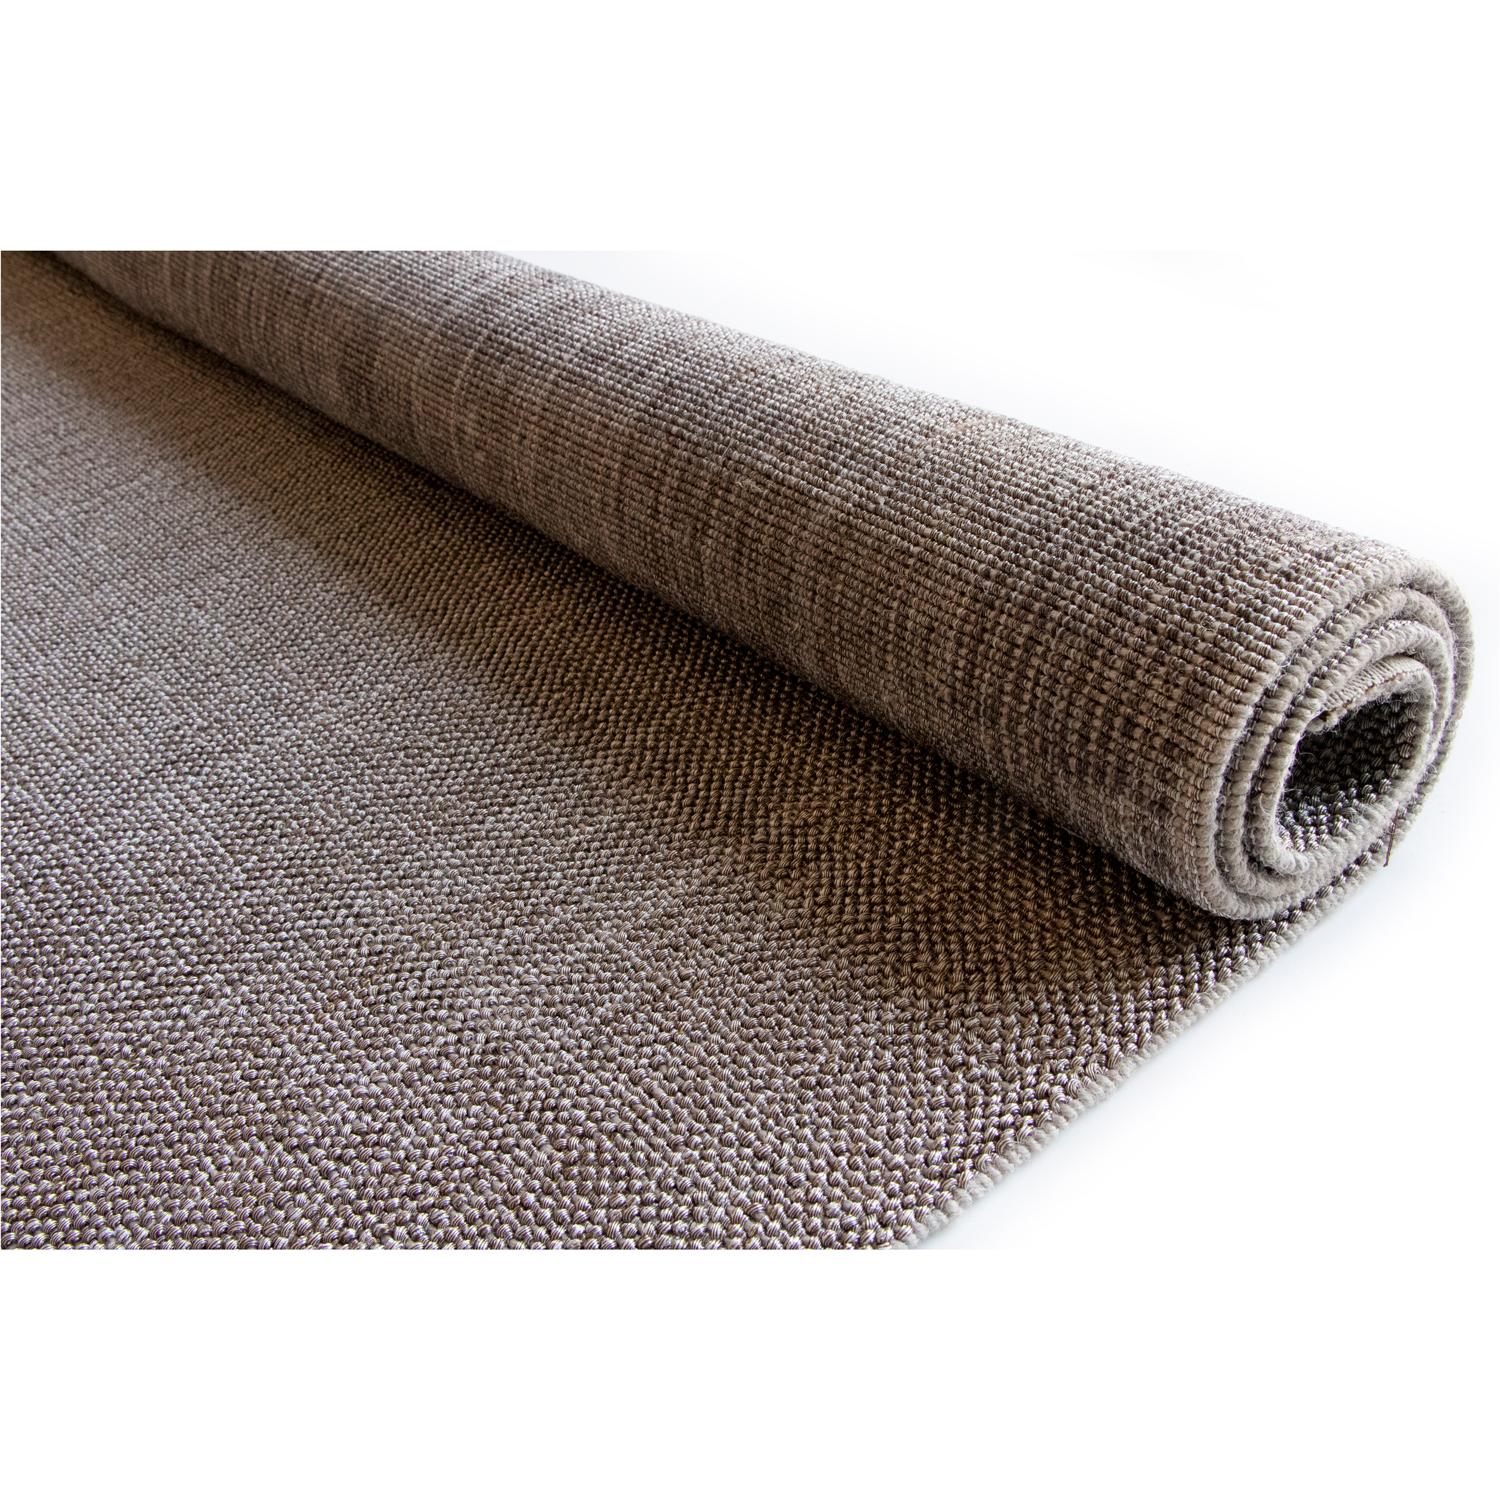 Contemporary Functional Design Grey Rug by Deanna Comellini In Stock 250x350 cm For Sale 2